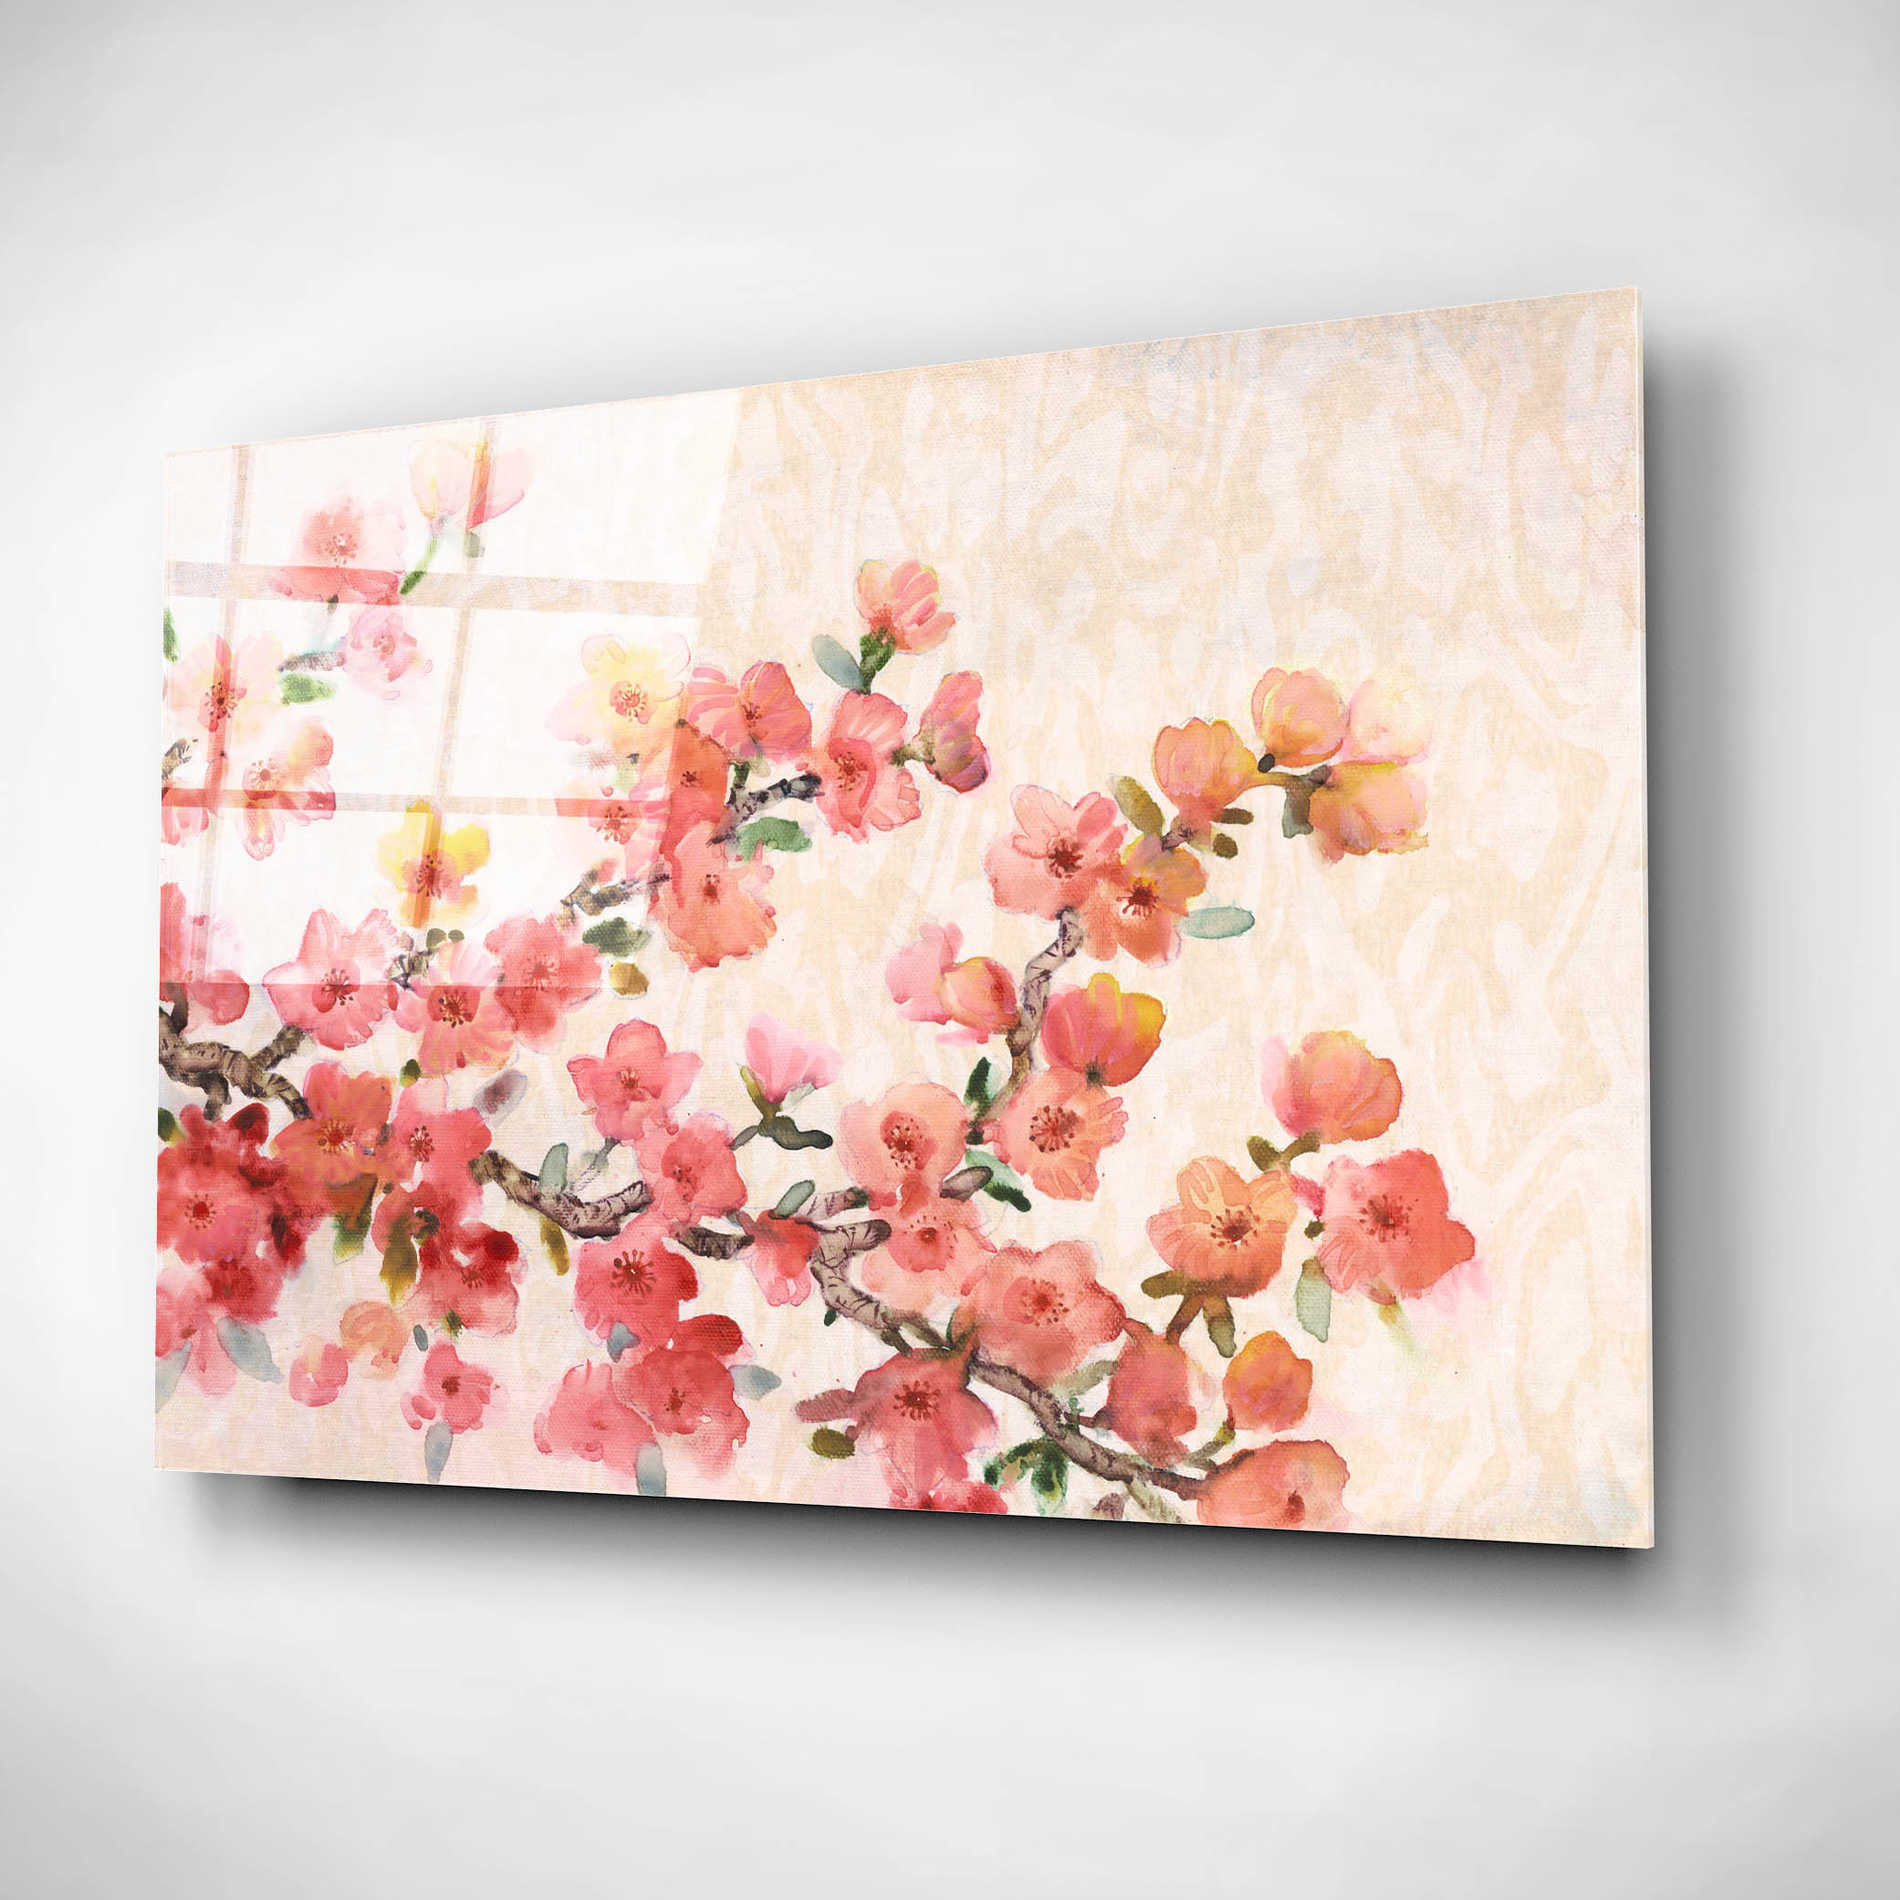 Epic Art 'Cherry Blossom Composition II' by Tim O'Toole, Acrylic Glass Wall Art,16x12